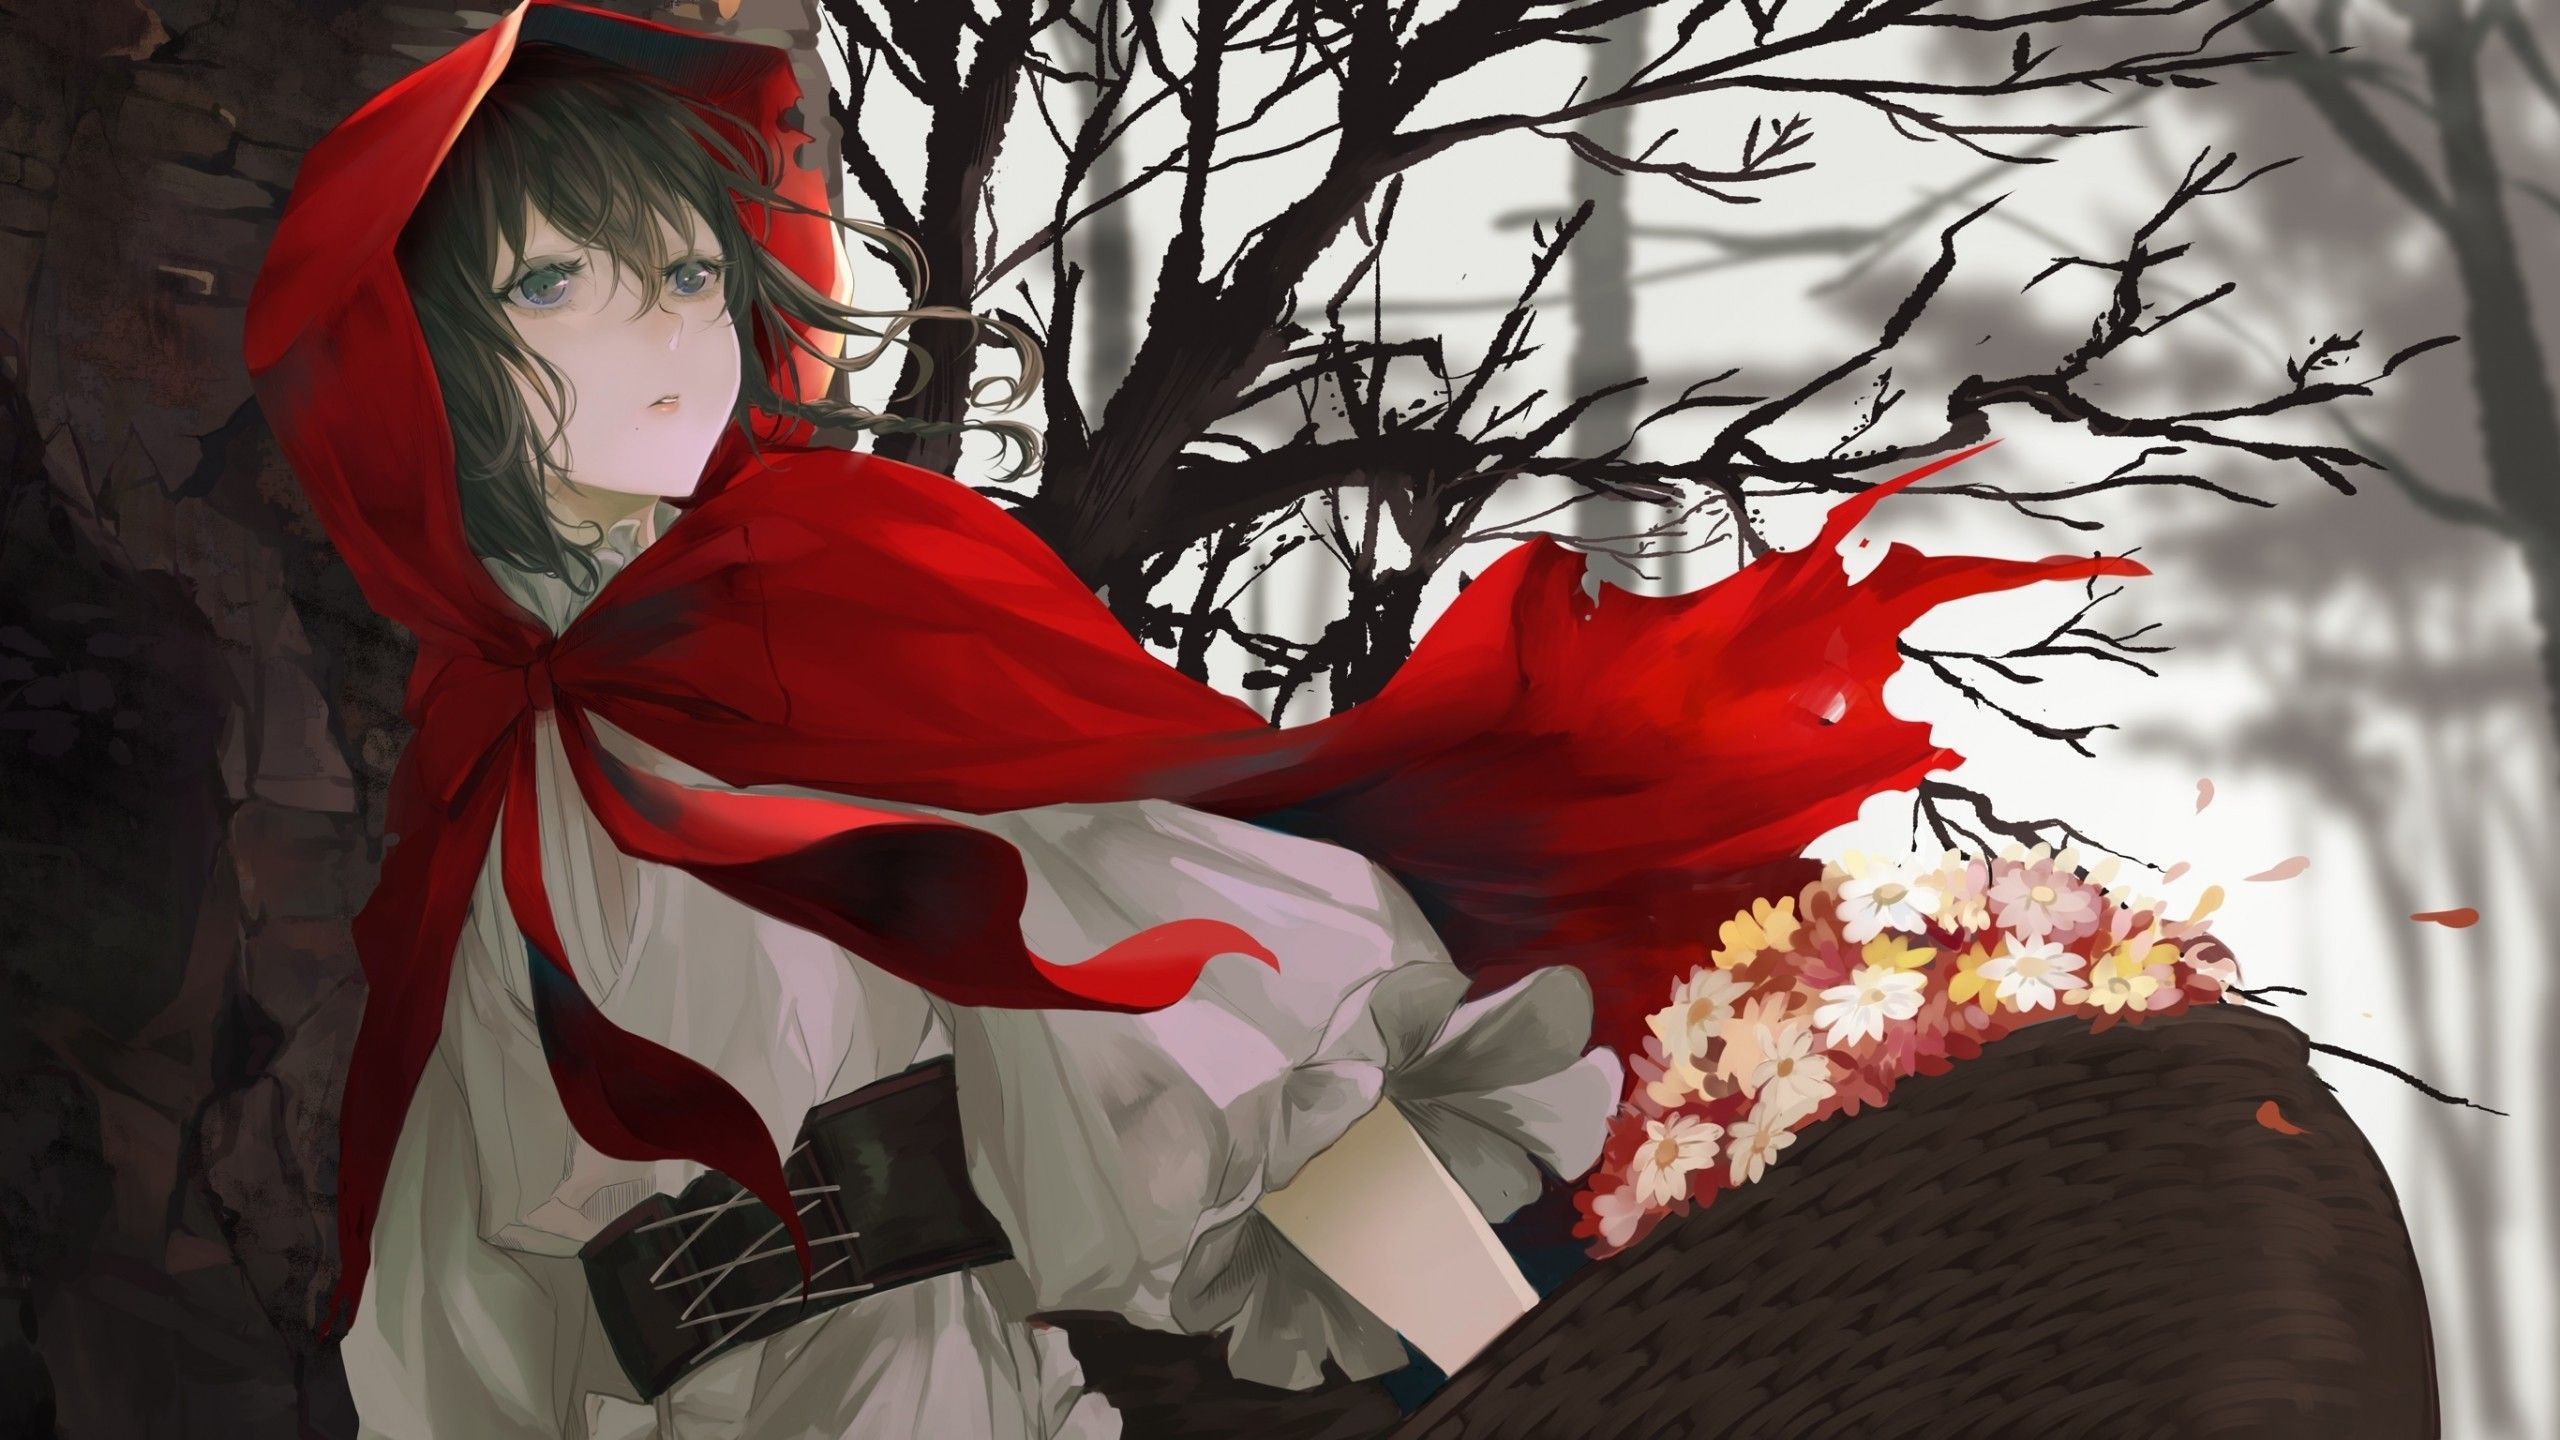 Download 2560x1440 Little Red Riding Hood, Anime Girl, Flowers